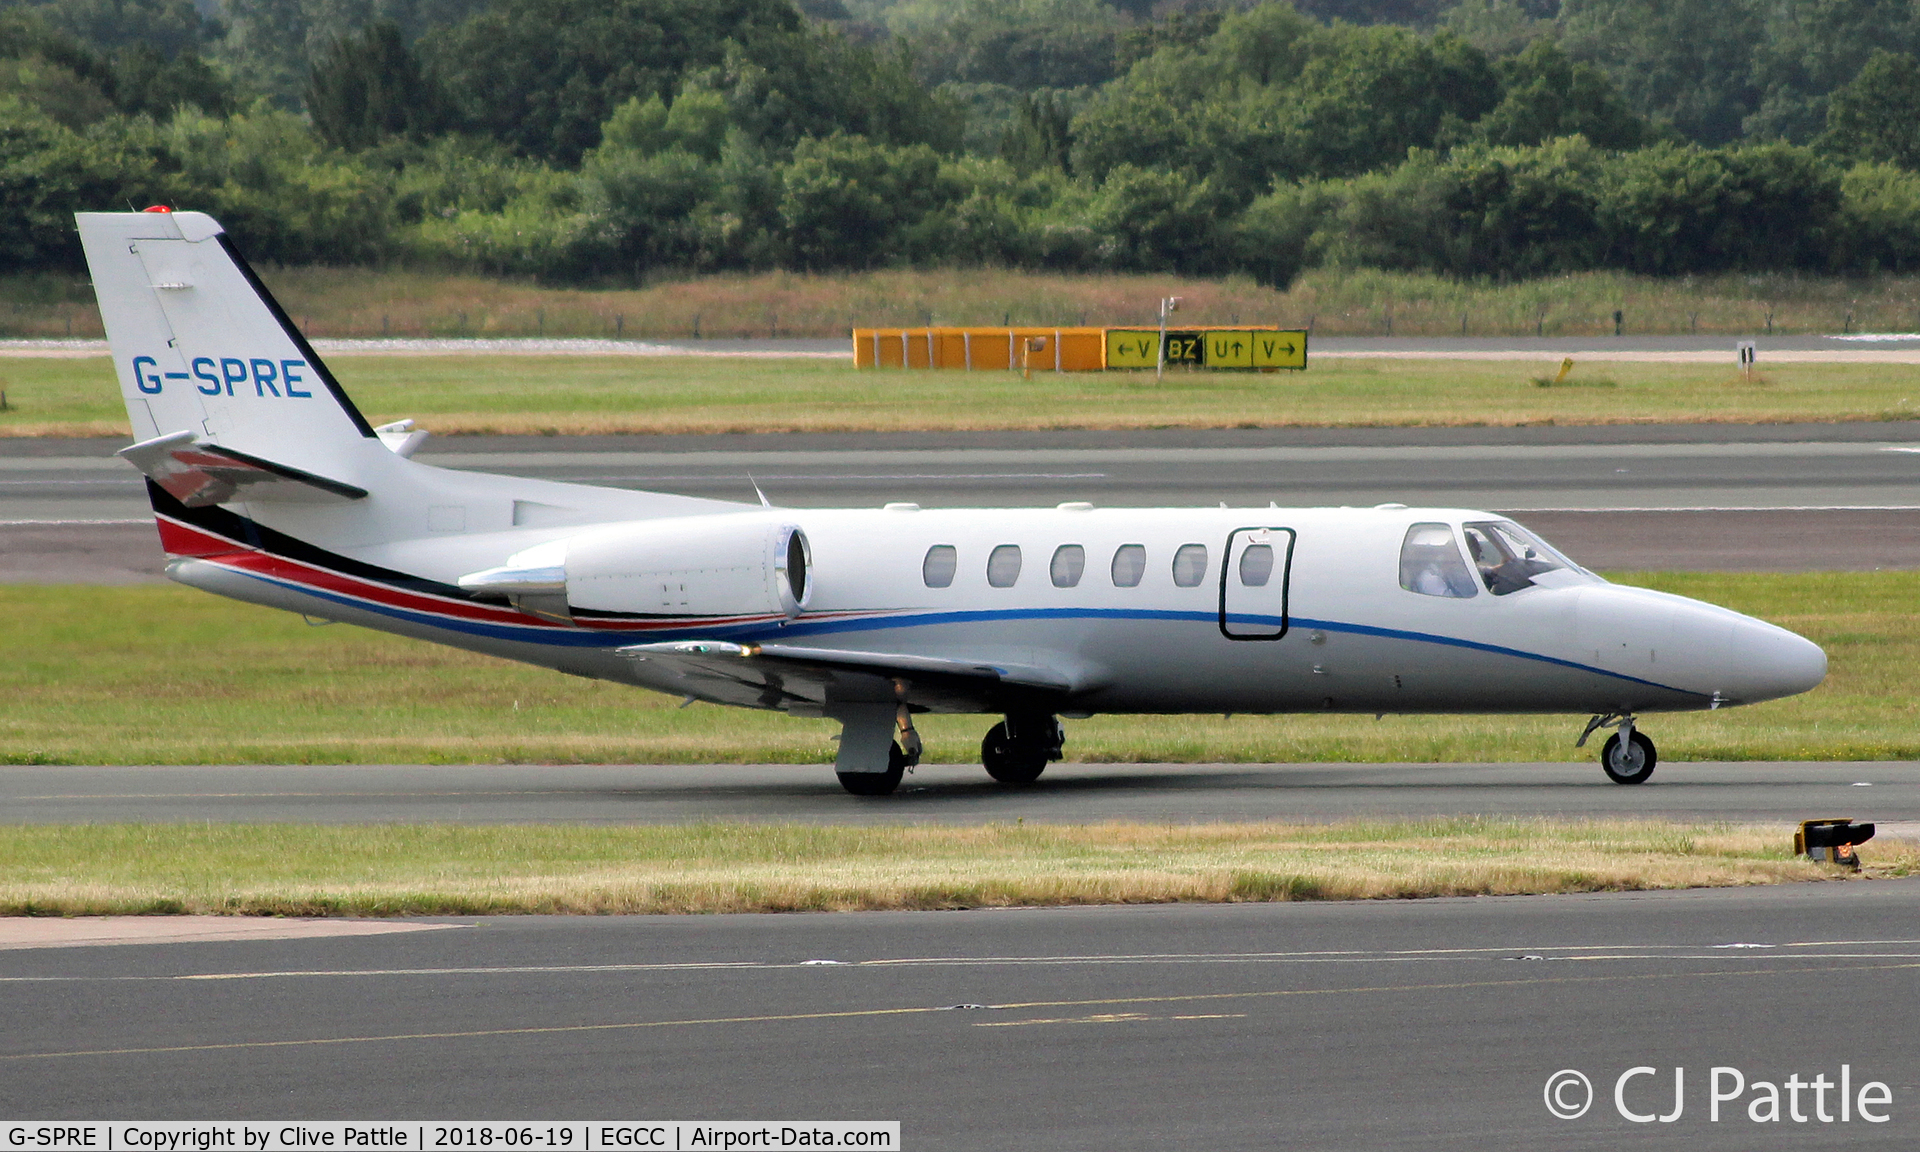 G-SPRE, 1999 Cessna 550 Citation Bravo C/N 550-0872, Taxy in at Manchester